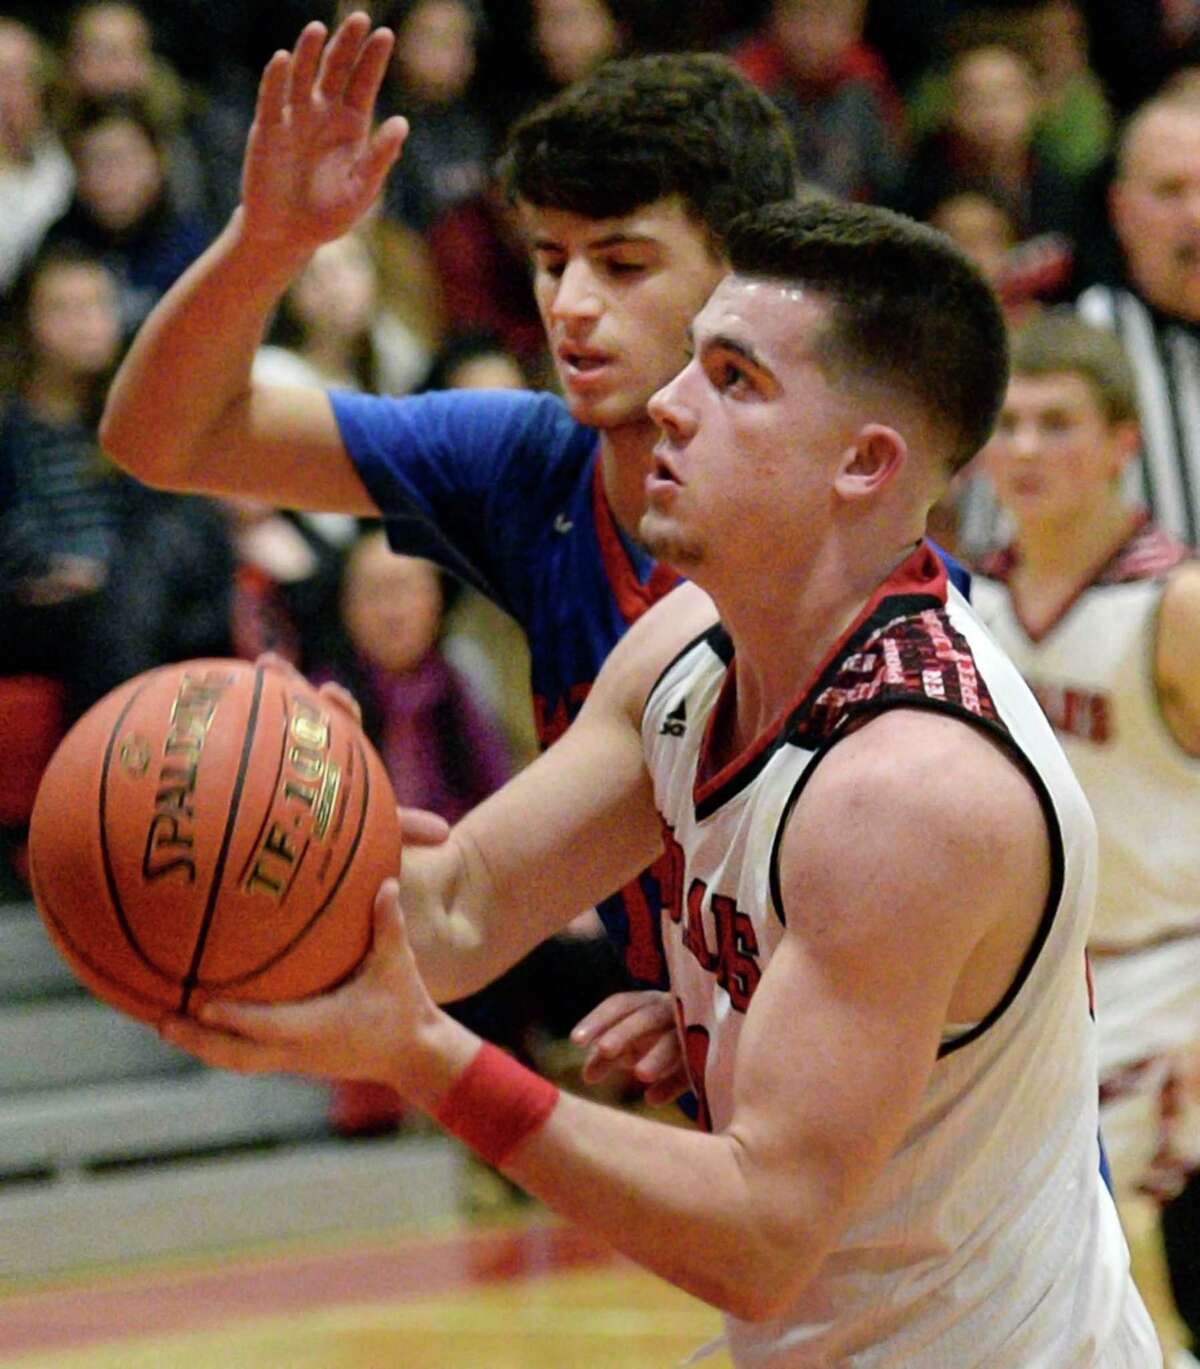 Glens Falls basketball opens with a victory